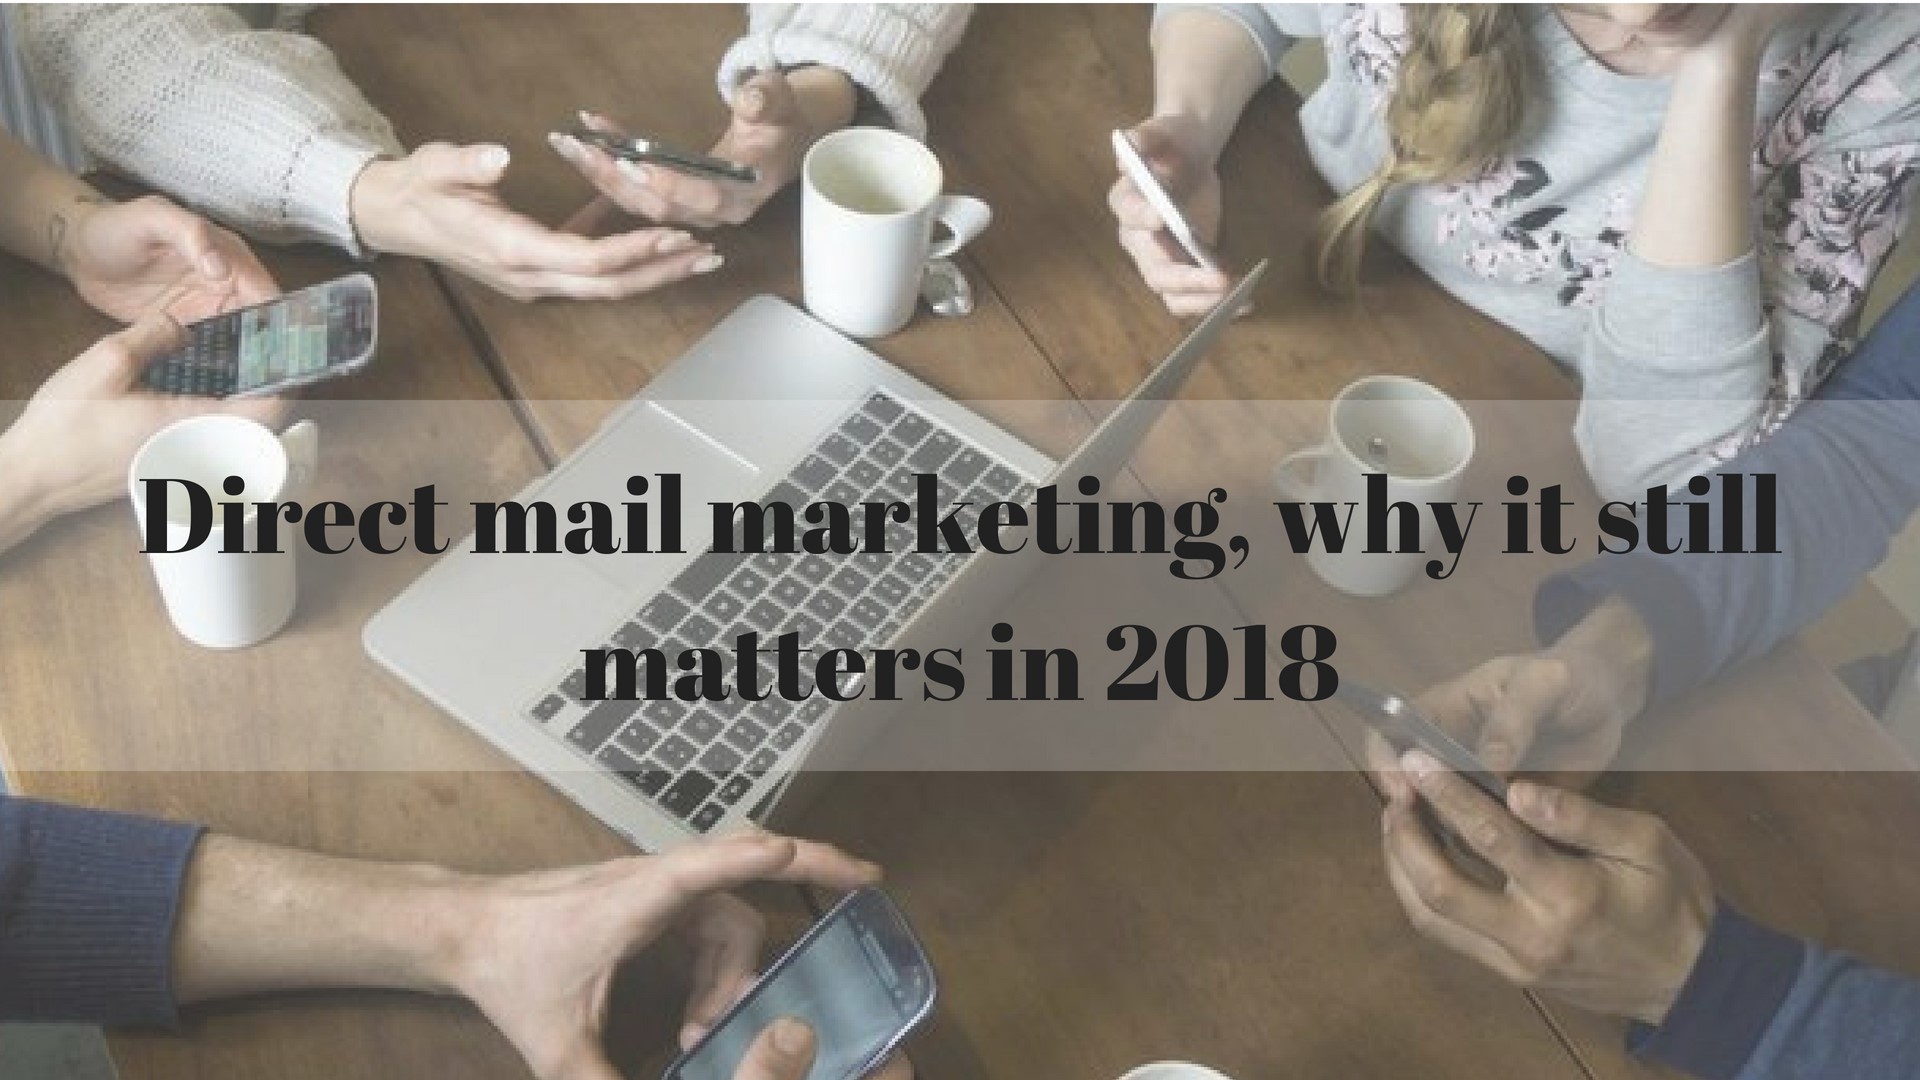 Direct mail marketing, why it still matters in 2018